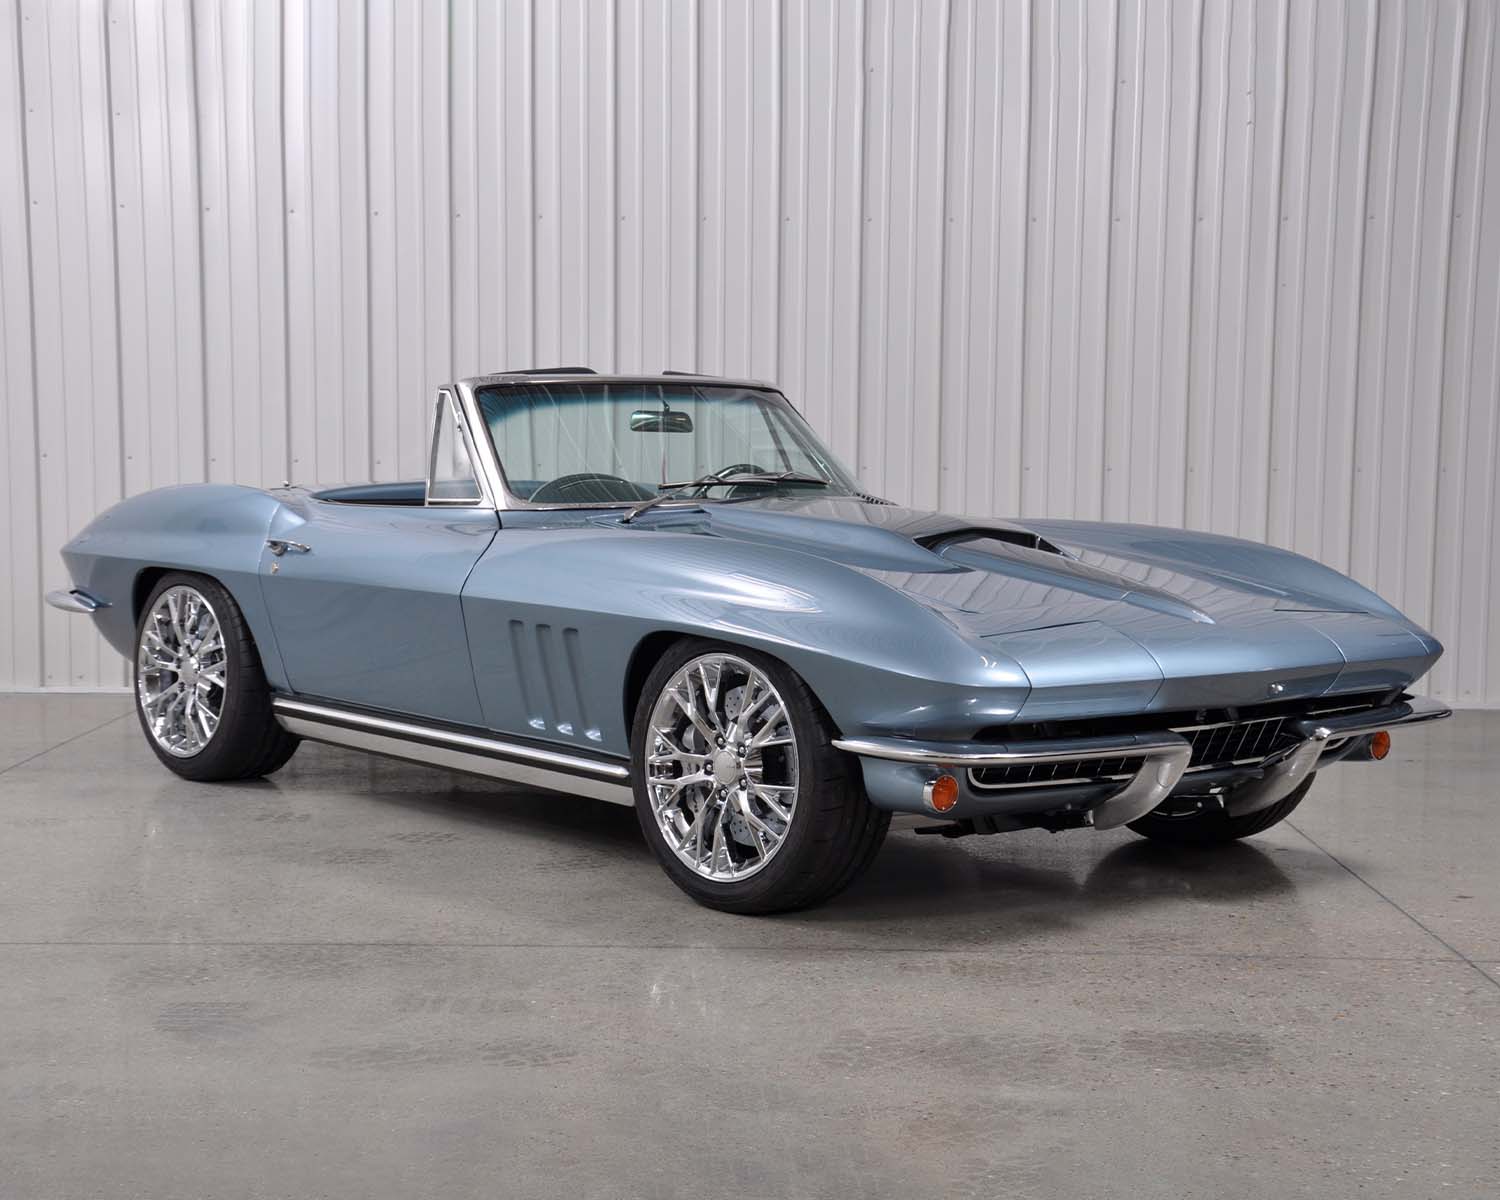 What to know about Barrett-Jackson collector car auction in Scottsdale